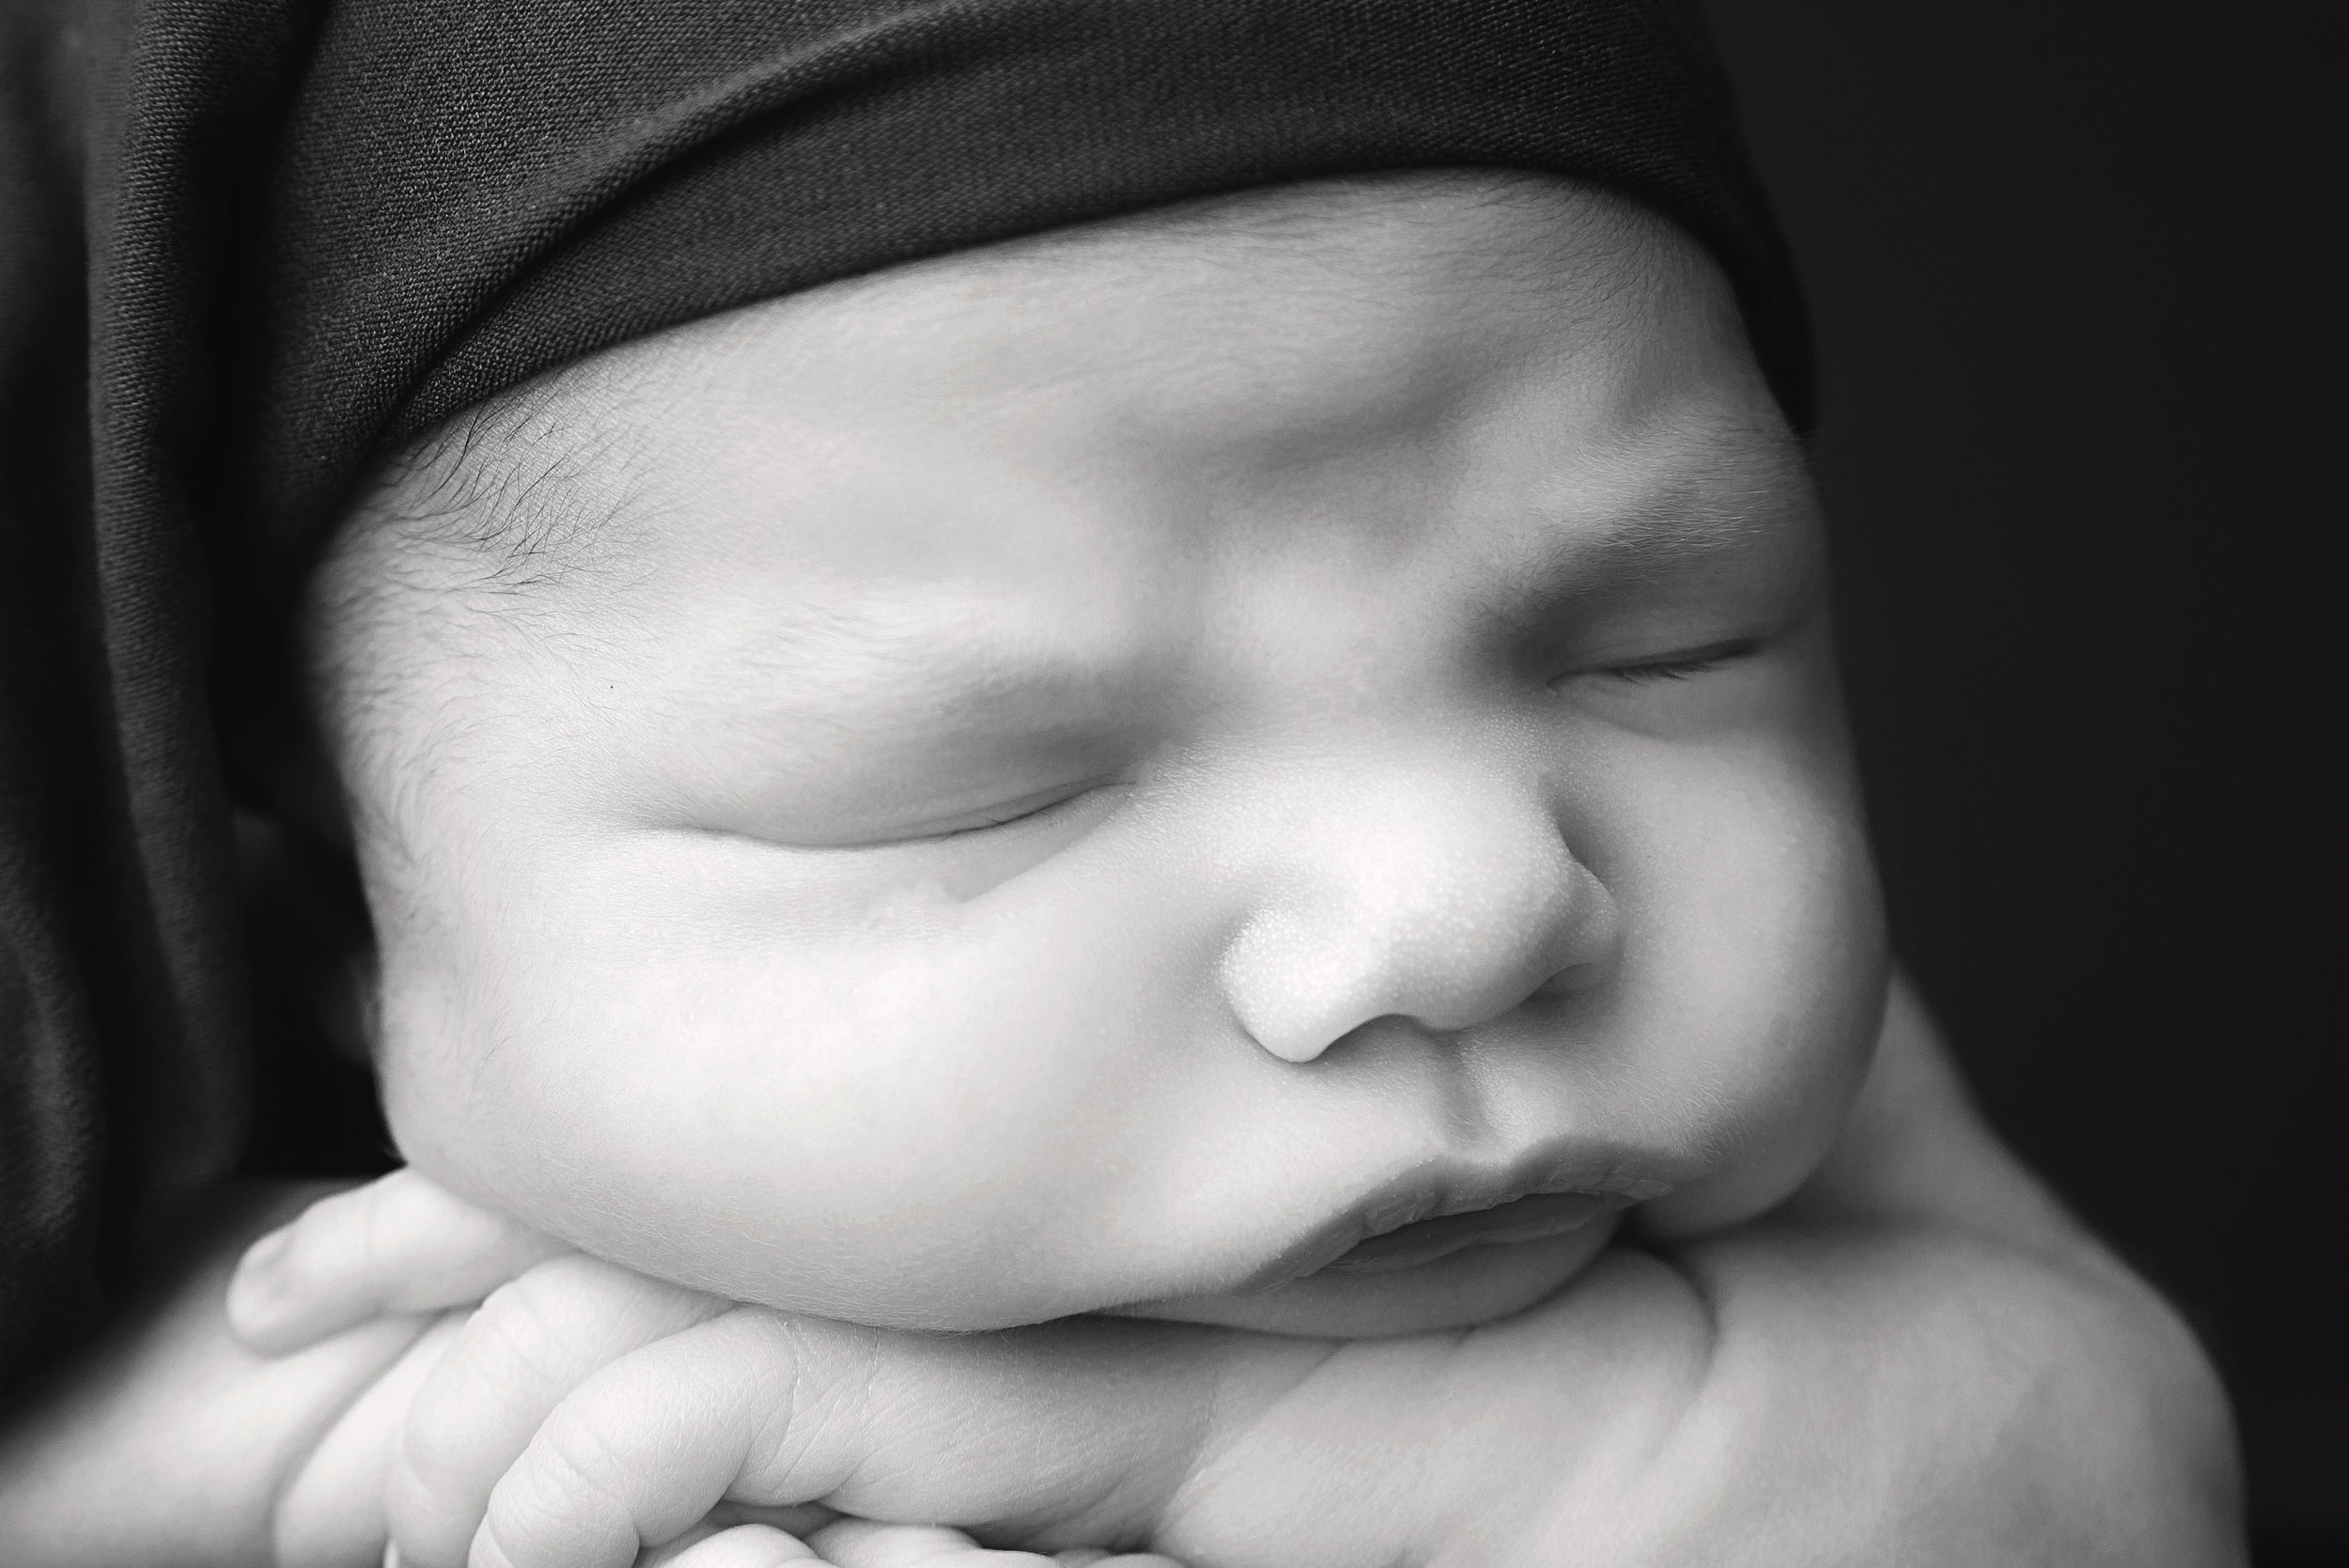 st-louis-newborn-photographer-black-and-white-image-of-boy-with-chin-on-arms.jpg